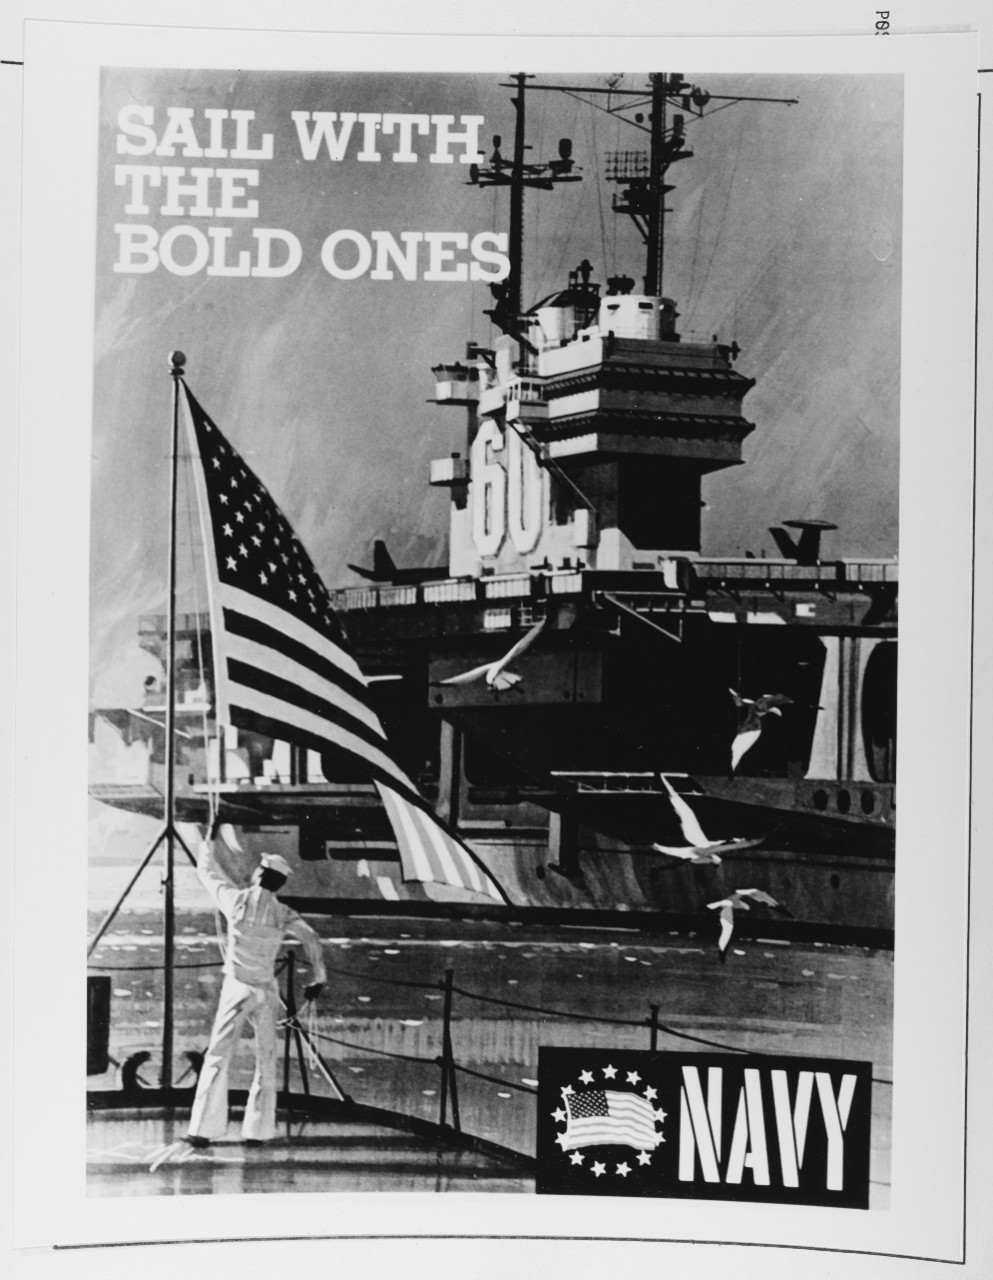 Navy recruiting poster:  "Sail with the bold ones"